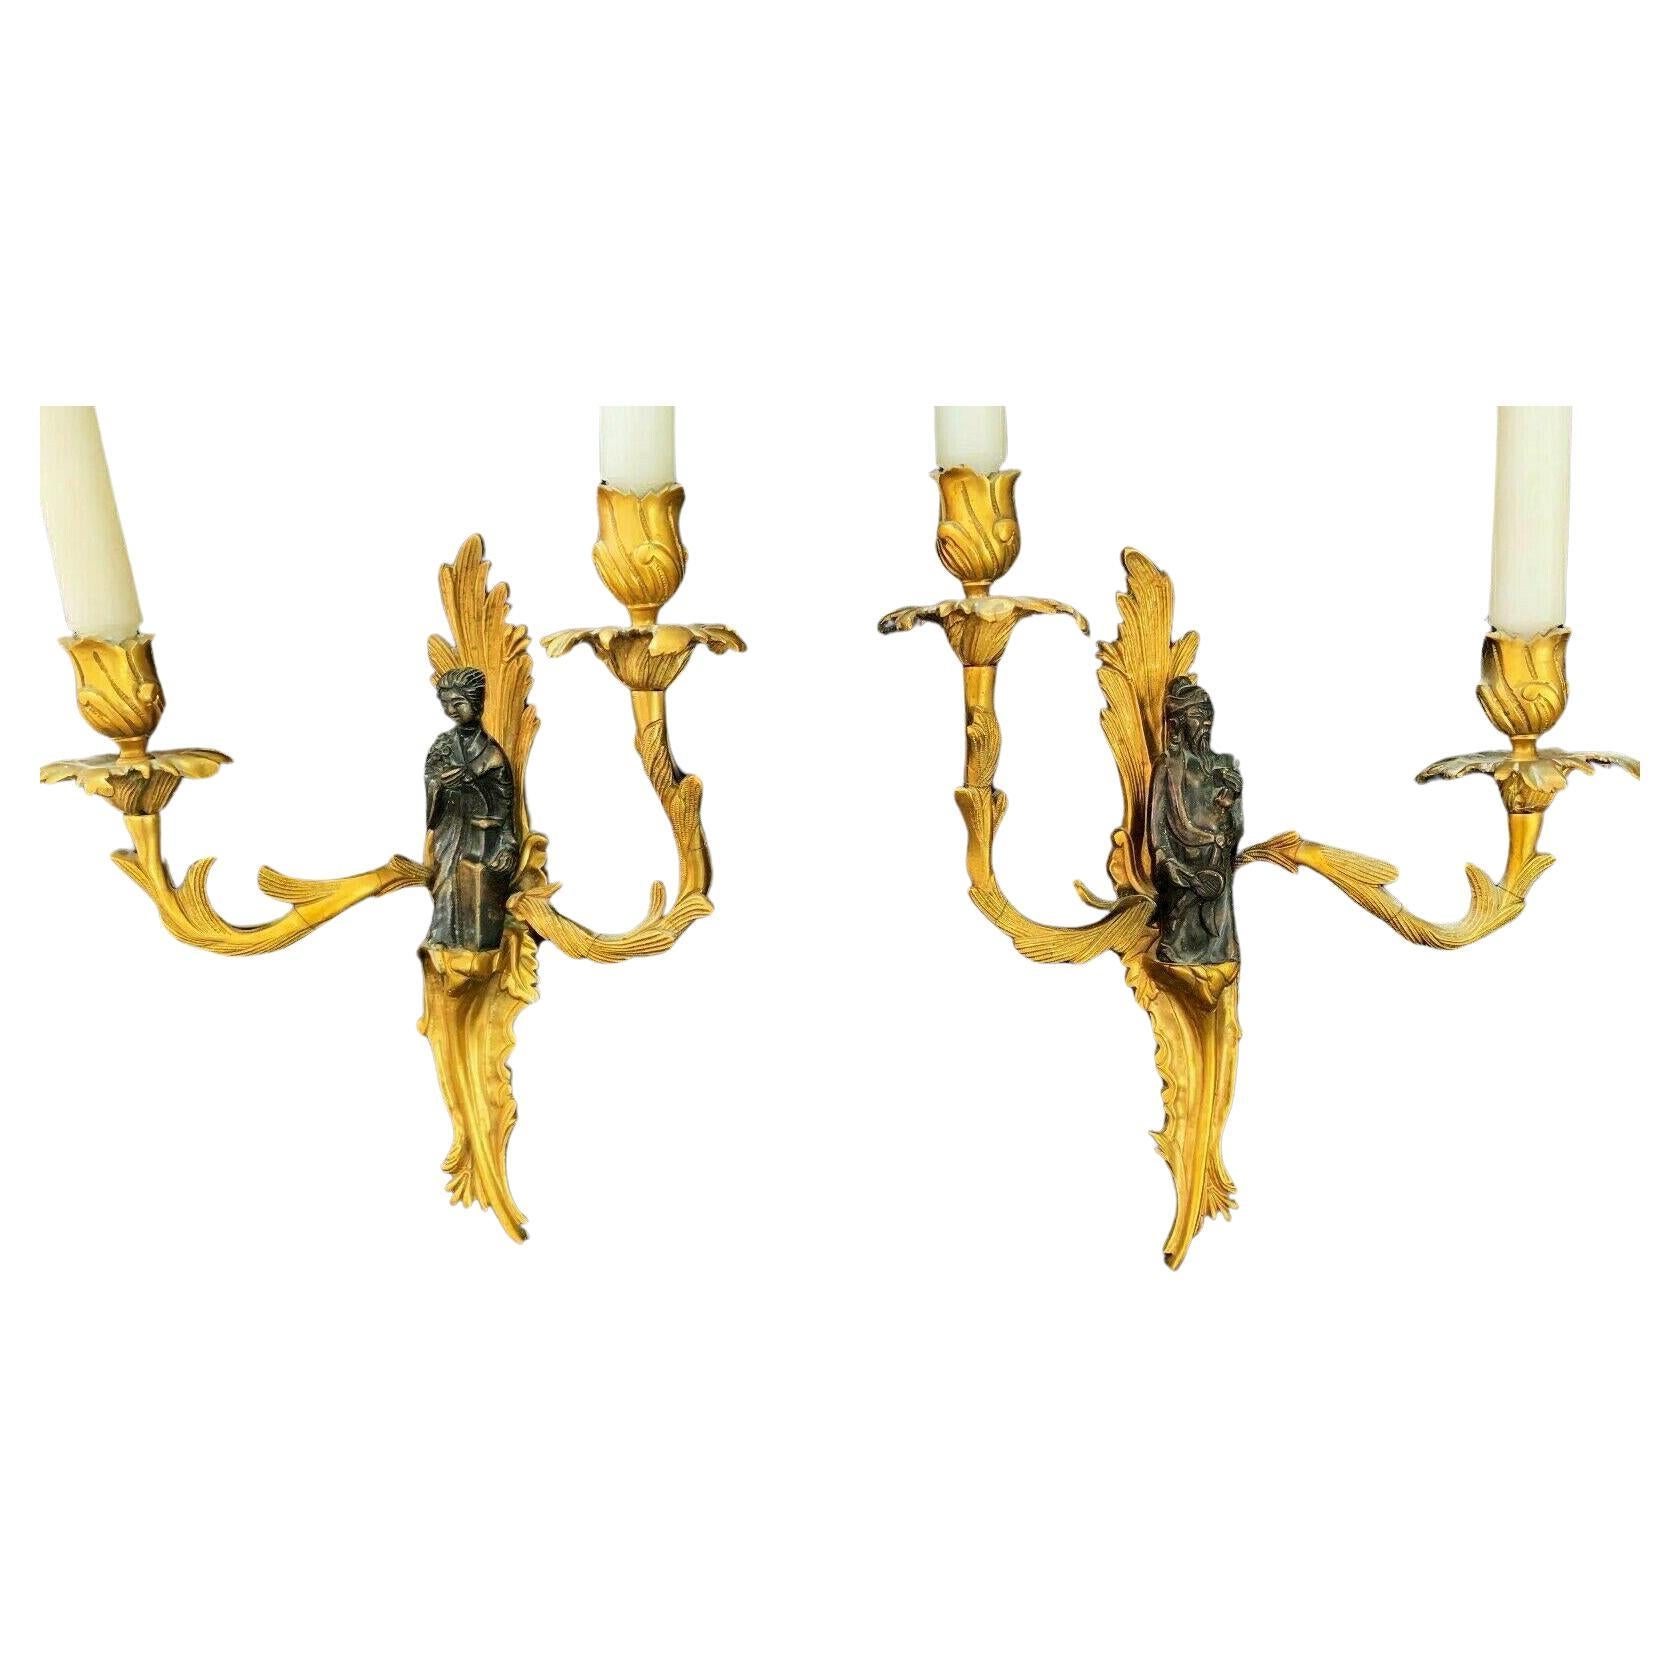 Pr. Antique French Maison Bagues style Chinoiserie Gilt & Patinated Wall Sconces